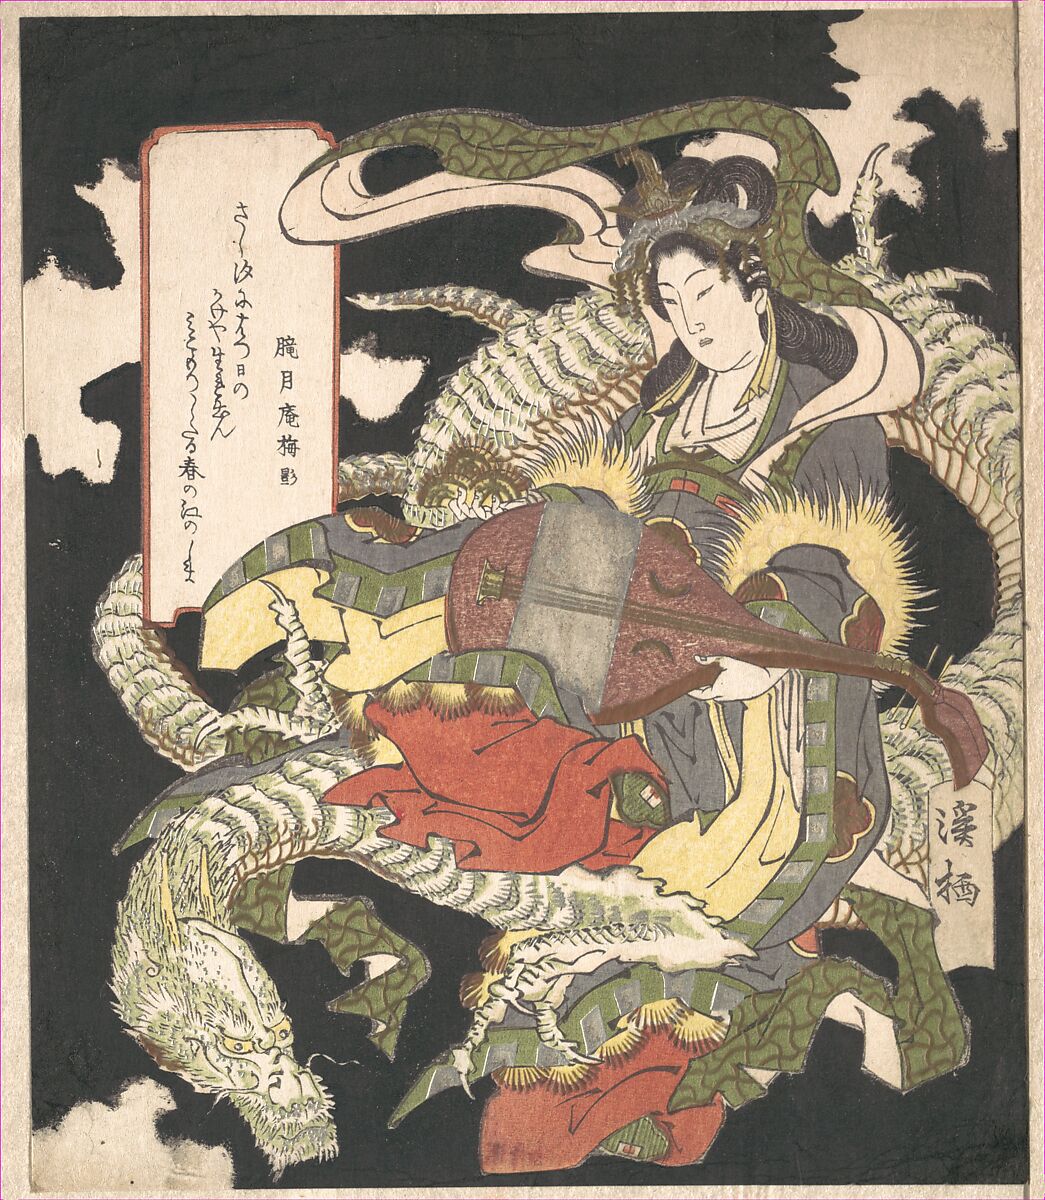 Benzaiten (Goddess of Music and Good Fortune) Seated on a White Dragon, Aoigaoka Keisei (Japanese, active 1820s–1830s), Woodblock print (surimono); ink and color on paper, Japan 